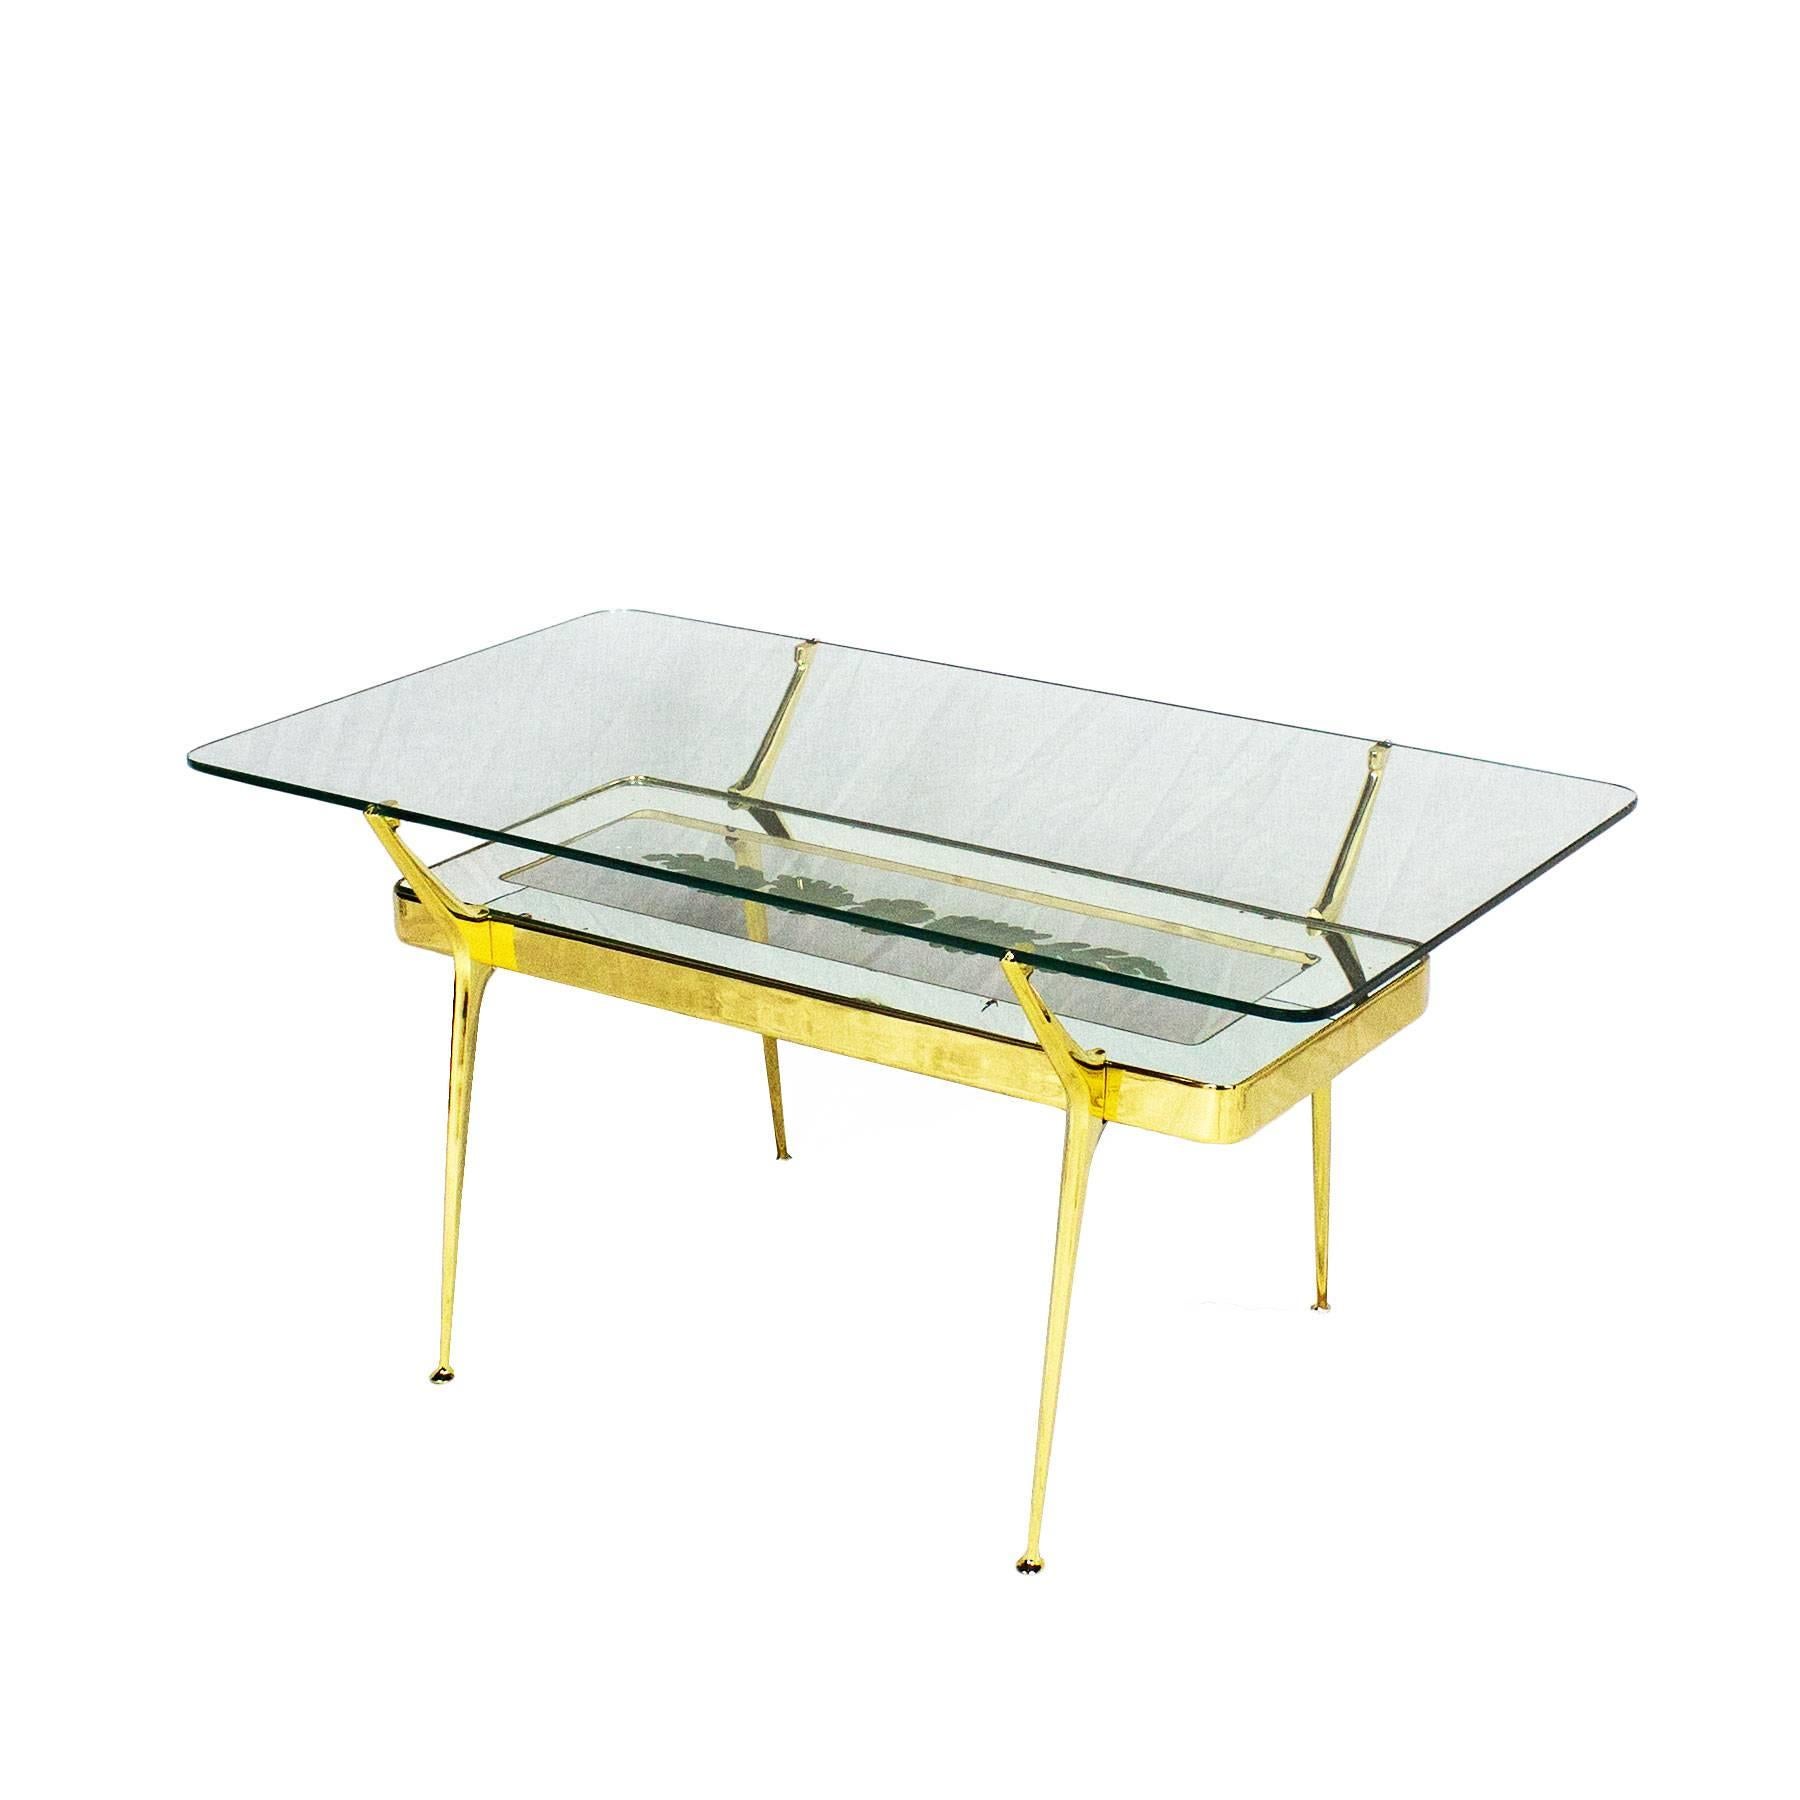 Coffee table, solid and polished brass structure, mirrored (oxidation and losses) and etched glass with flowers decoration. Thick original glass on top.

Design: Cesare Lacca

Italy, circa 1950.